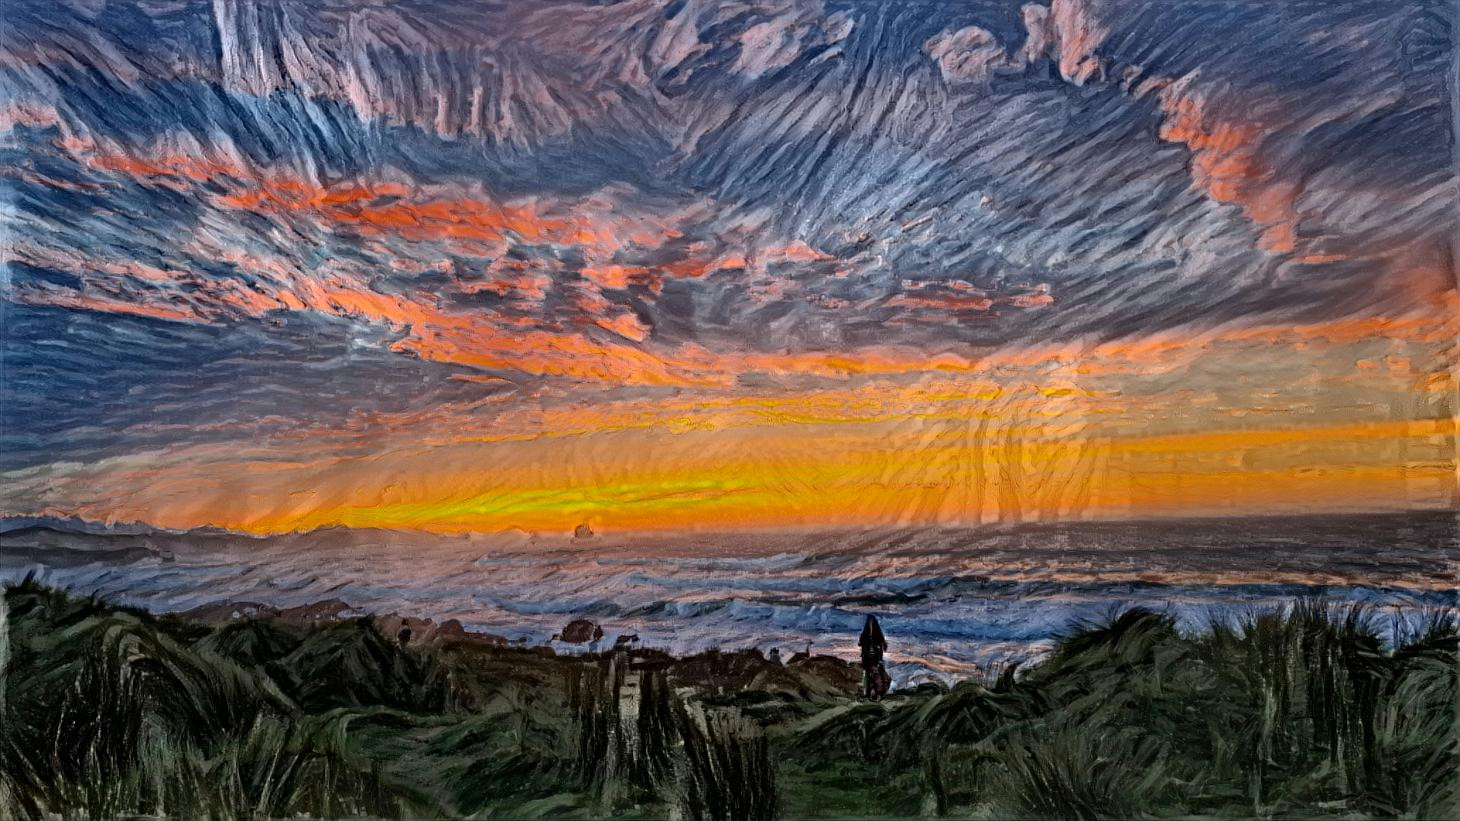 Beach pic transformed in a van Gogh style by NatureWorshiper